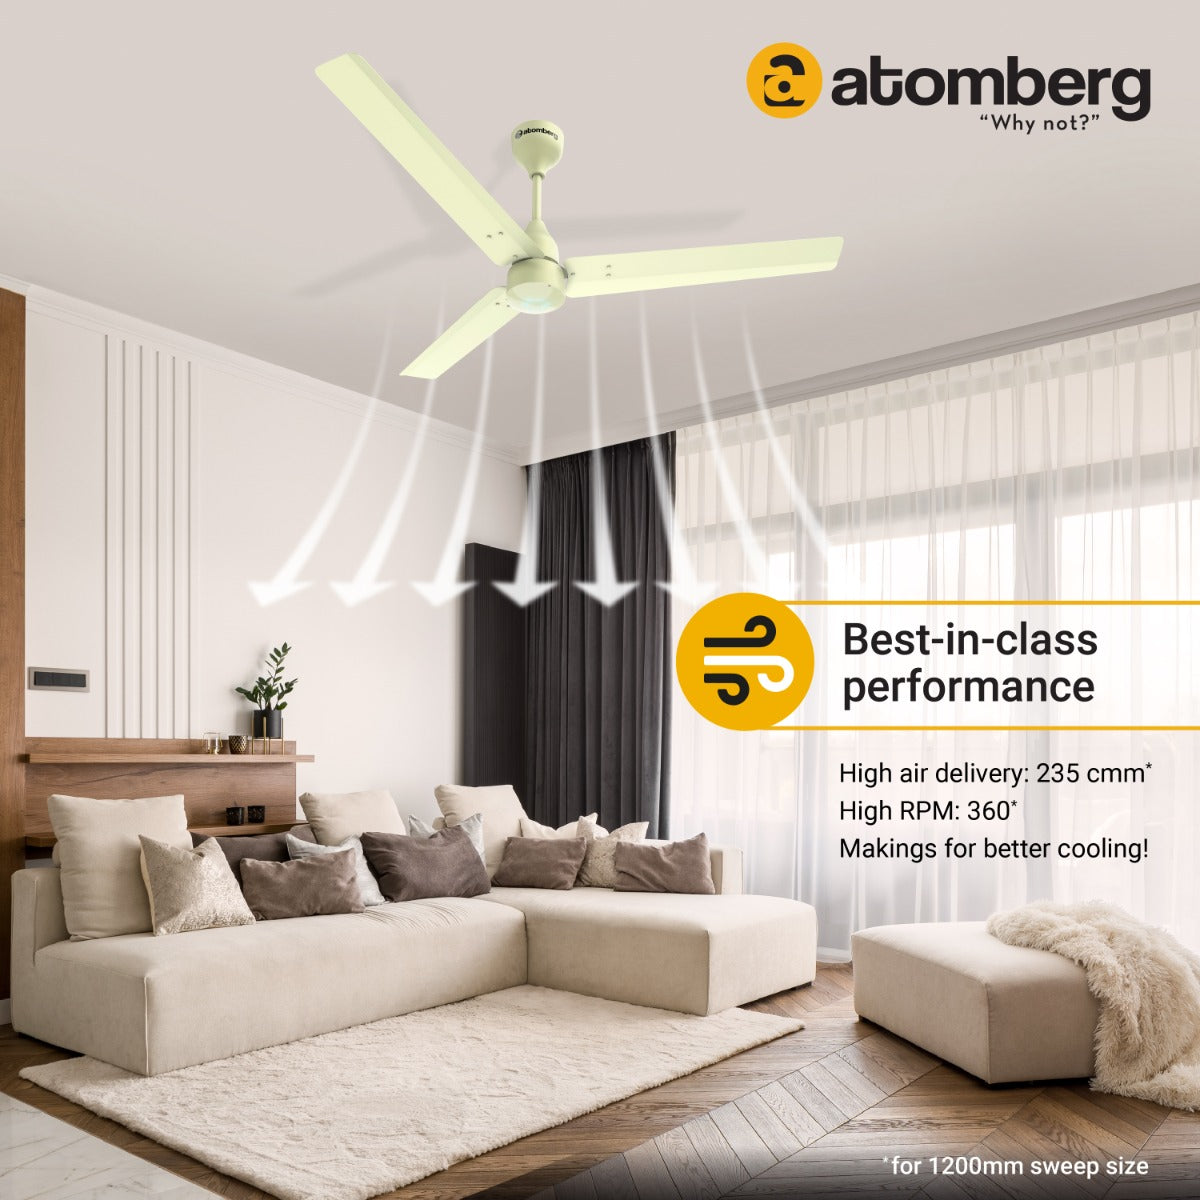 Atomberg Renesa 1200 mm BLDC Motor with Remote 3 Blade Ceiling Fan Ivory Pack of 1